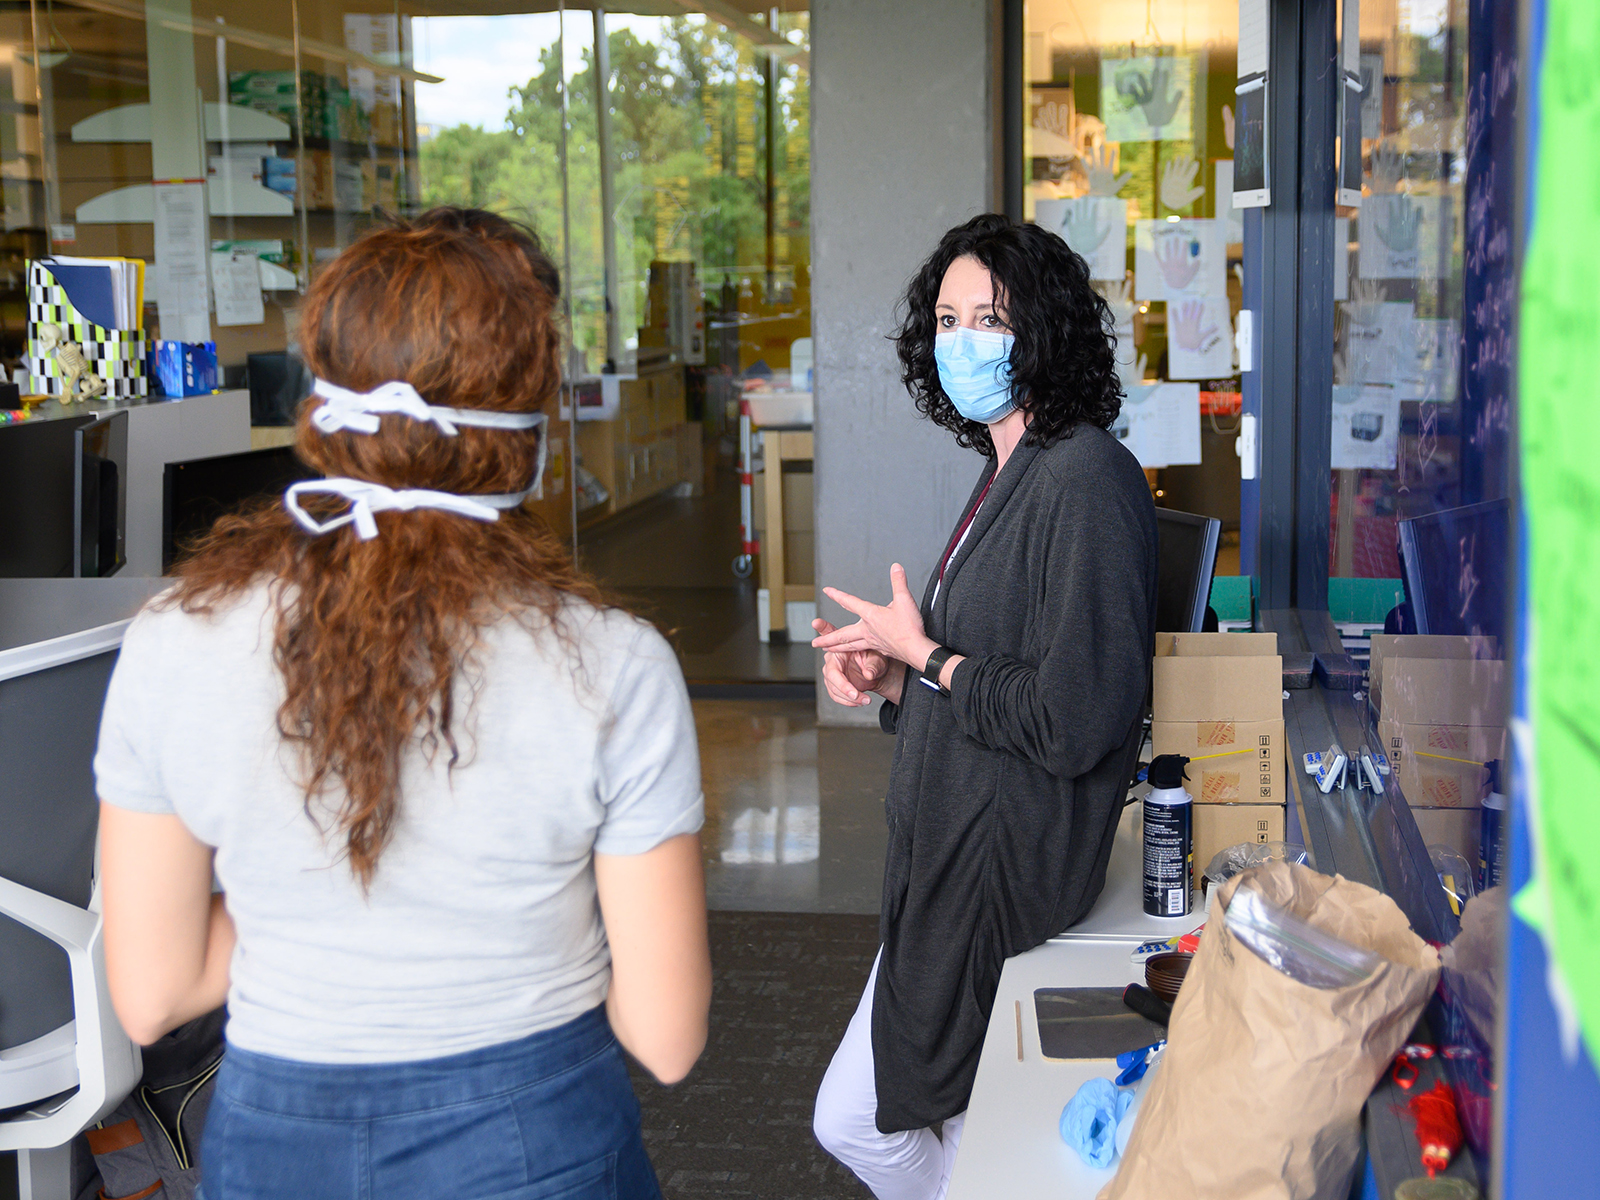 Researchers wear masks and practice distancing in the workspace in the Krone Engineered Biosystems Building